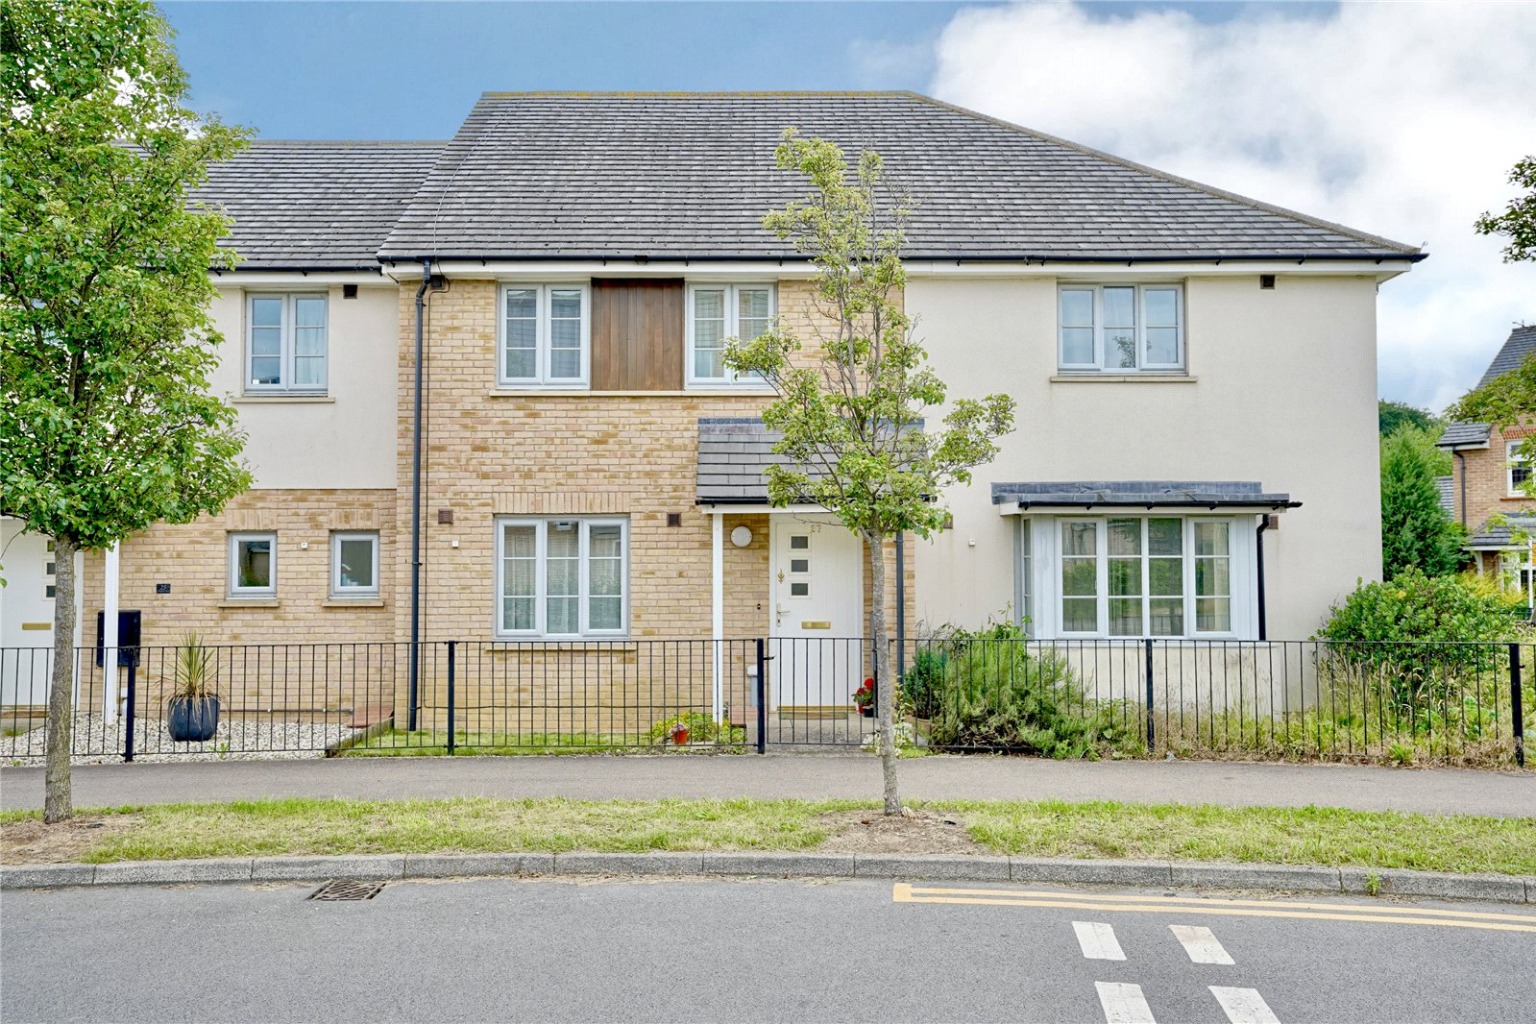 2 bed terraced house for sale in Hogsden Leys, St. Neots - Property Image 1